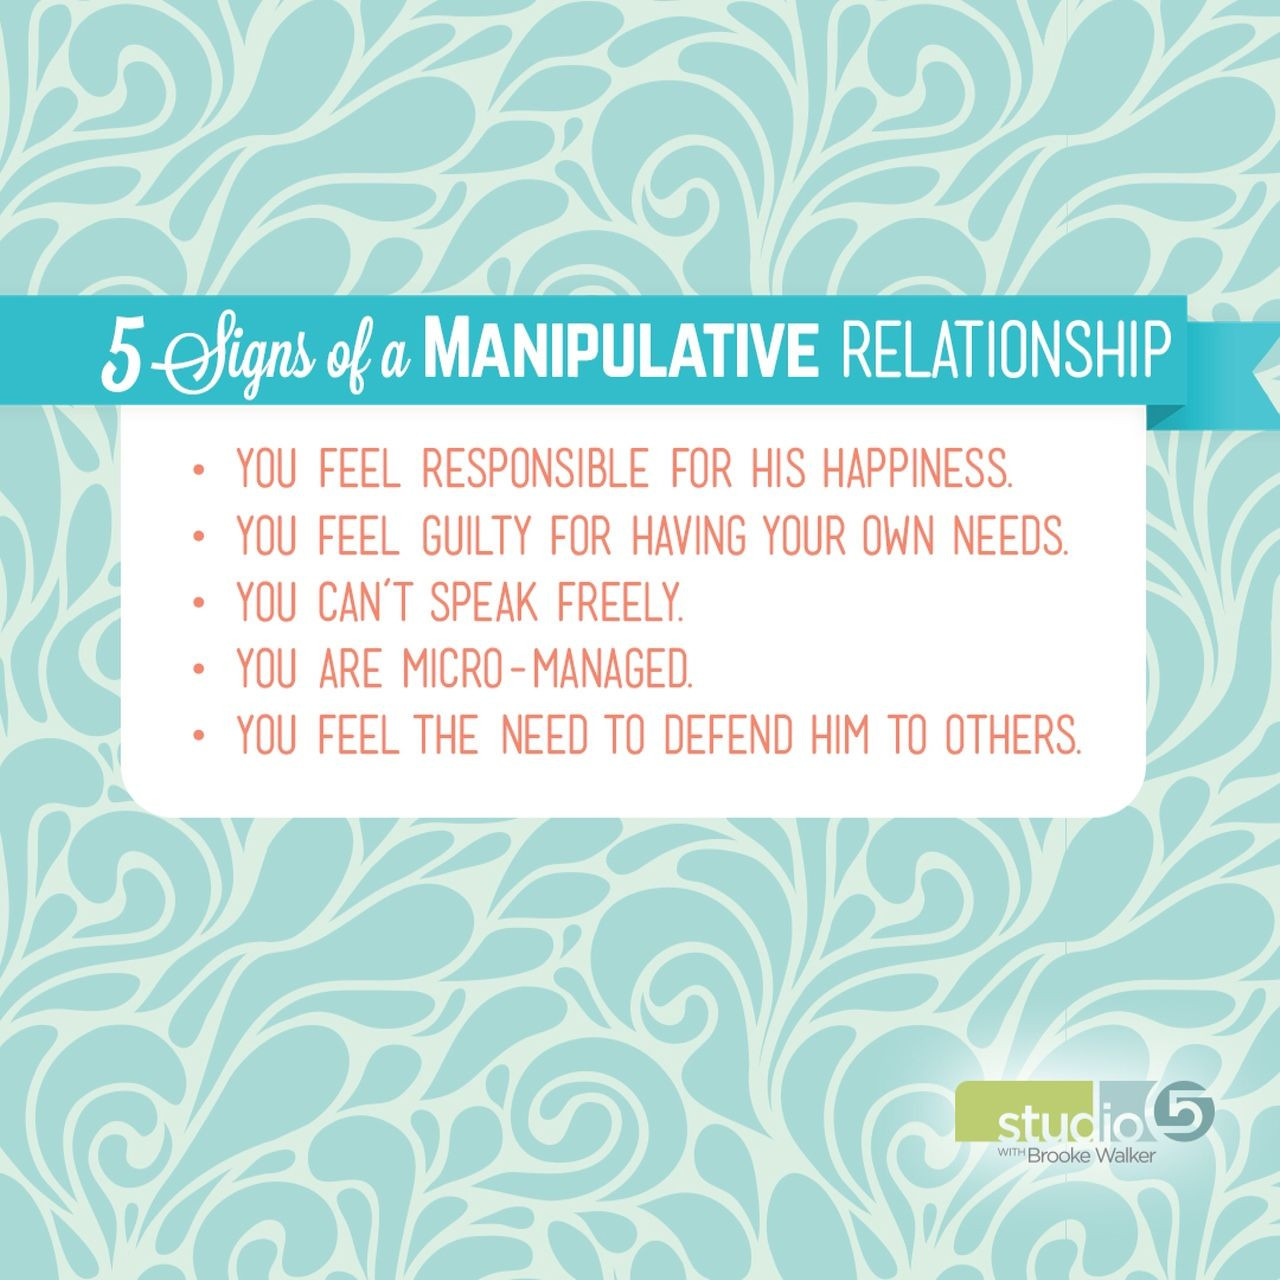 Manipulative Relationship Quotes
 Five Signs of a Manipulative Relationship